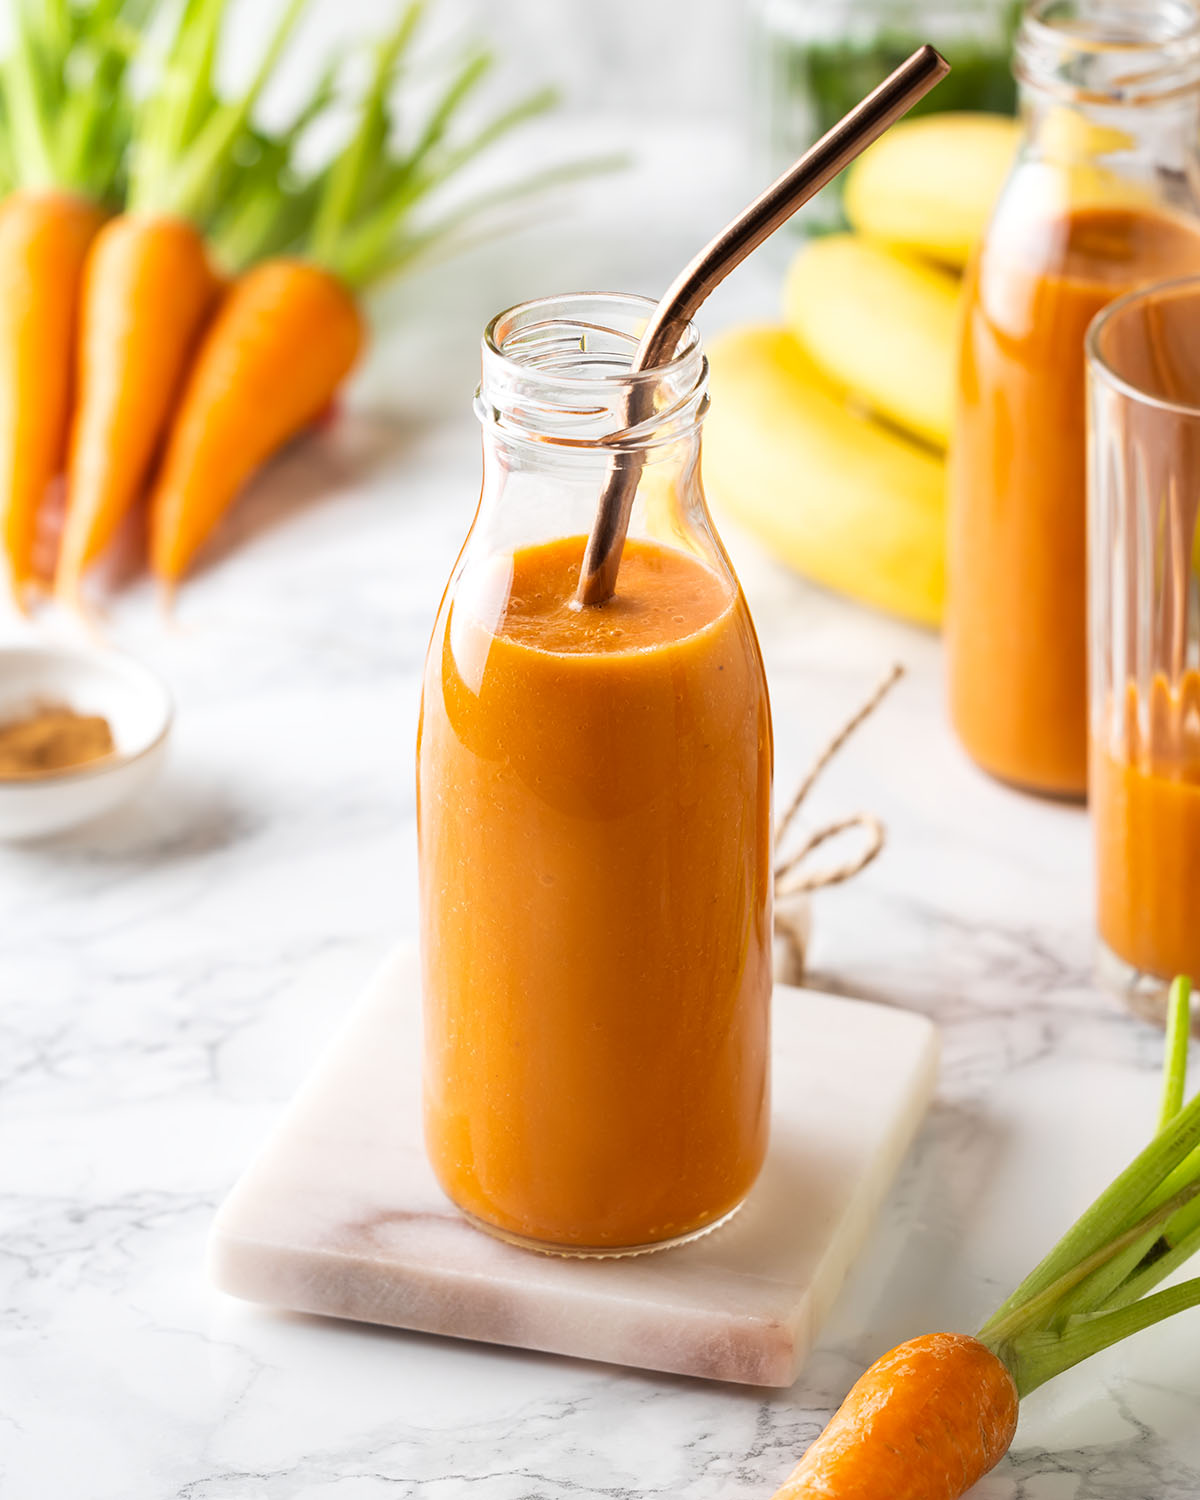 Carrot banana smoothie in a bottle with a straw inside